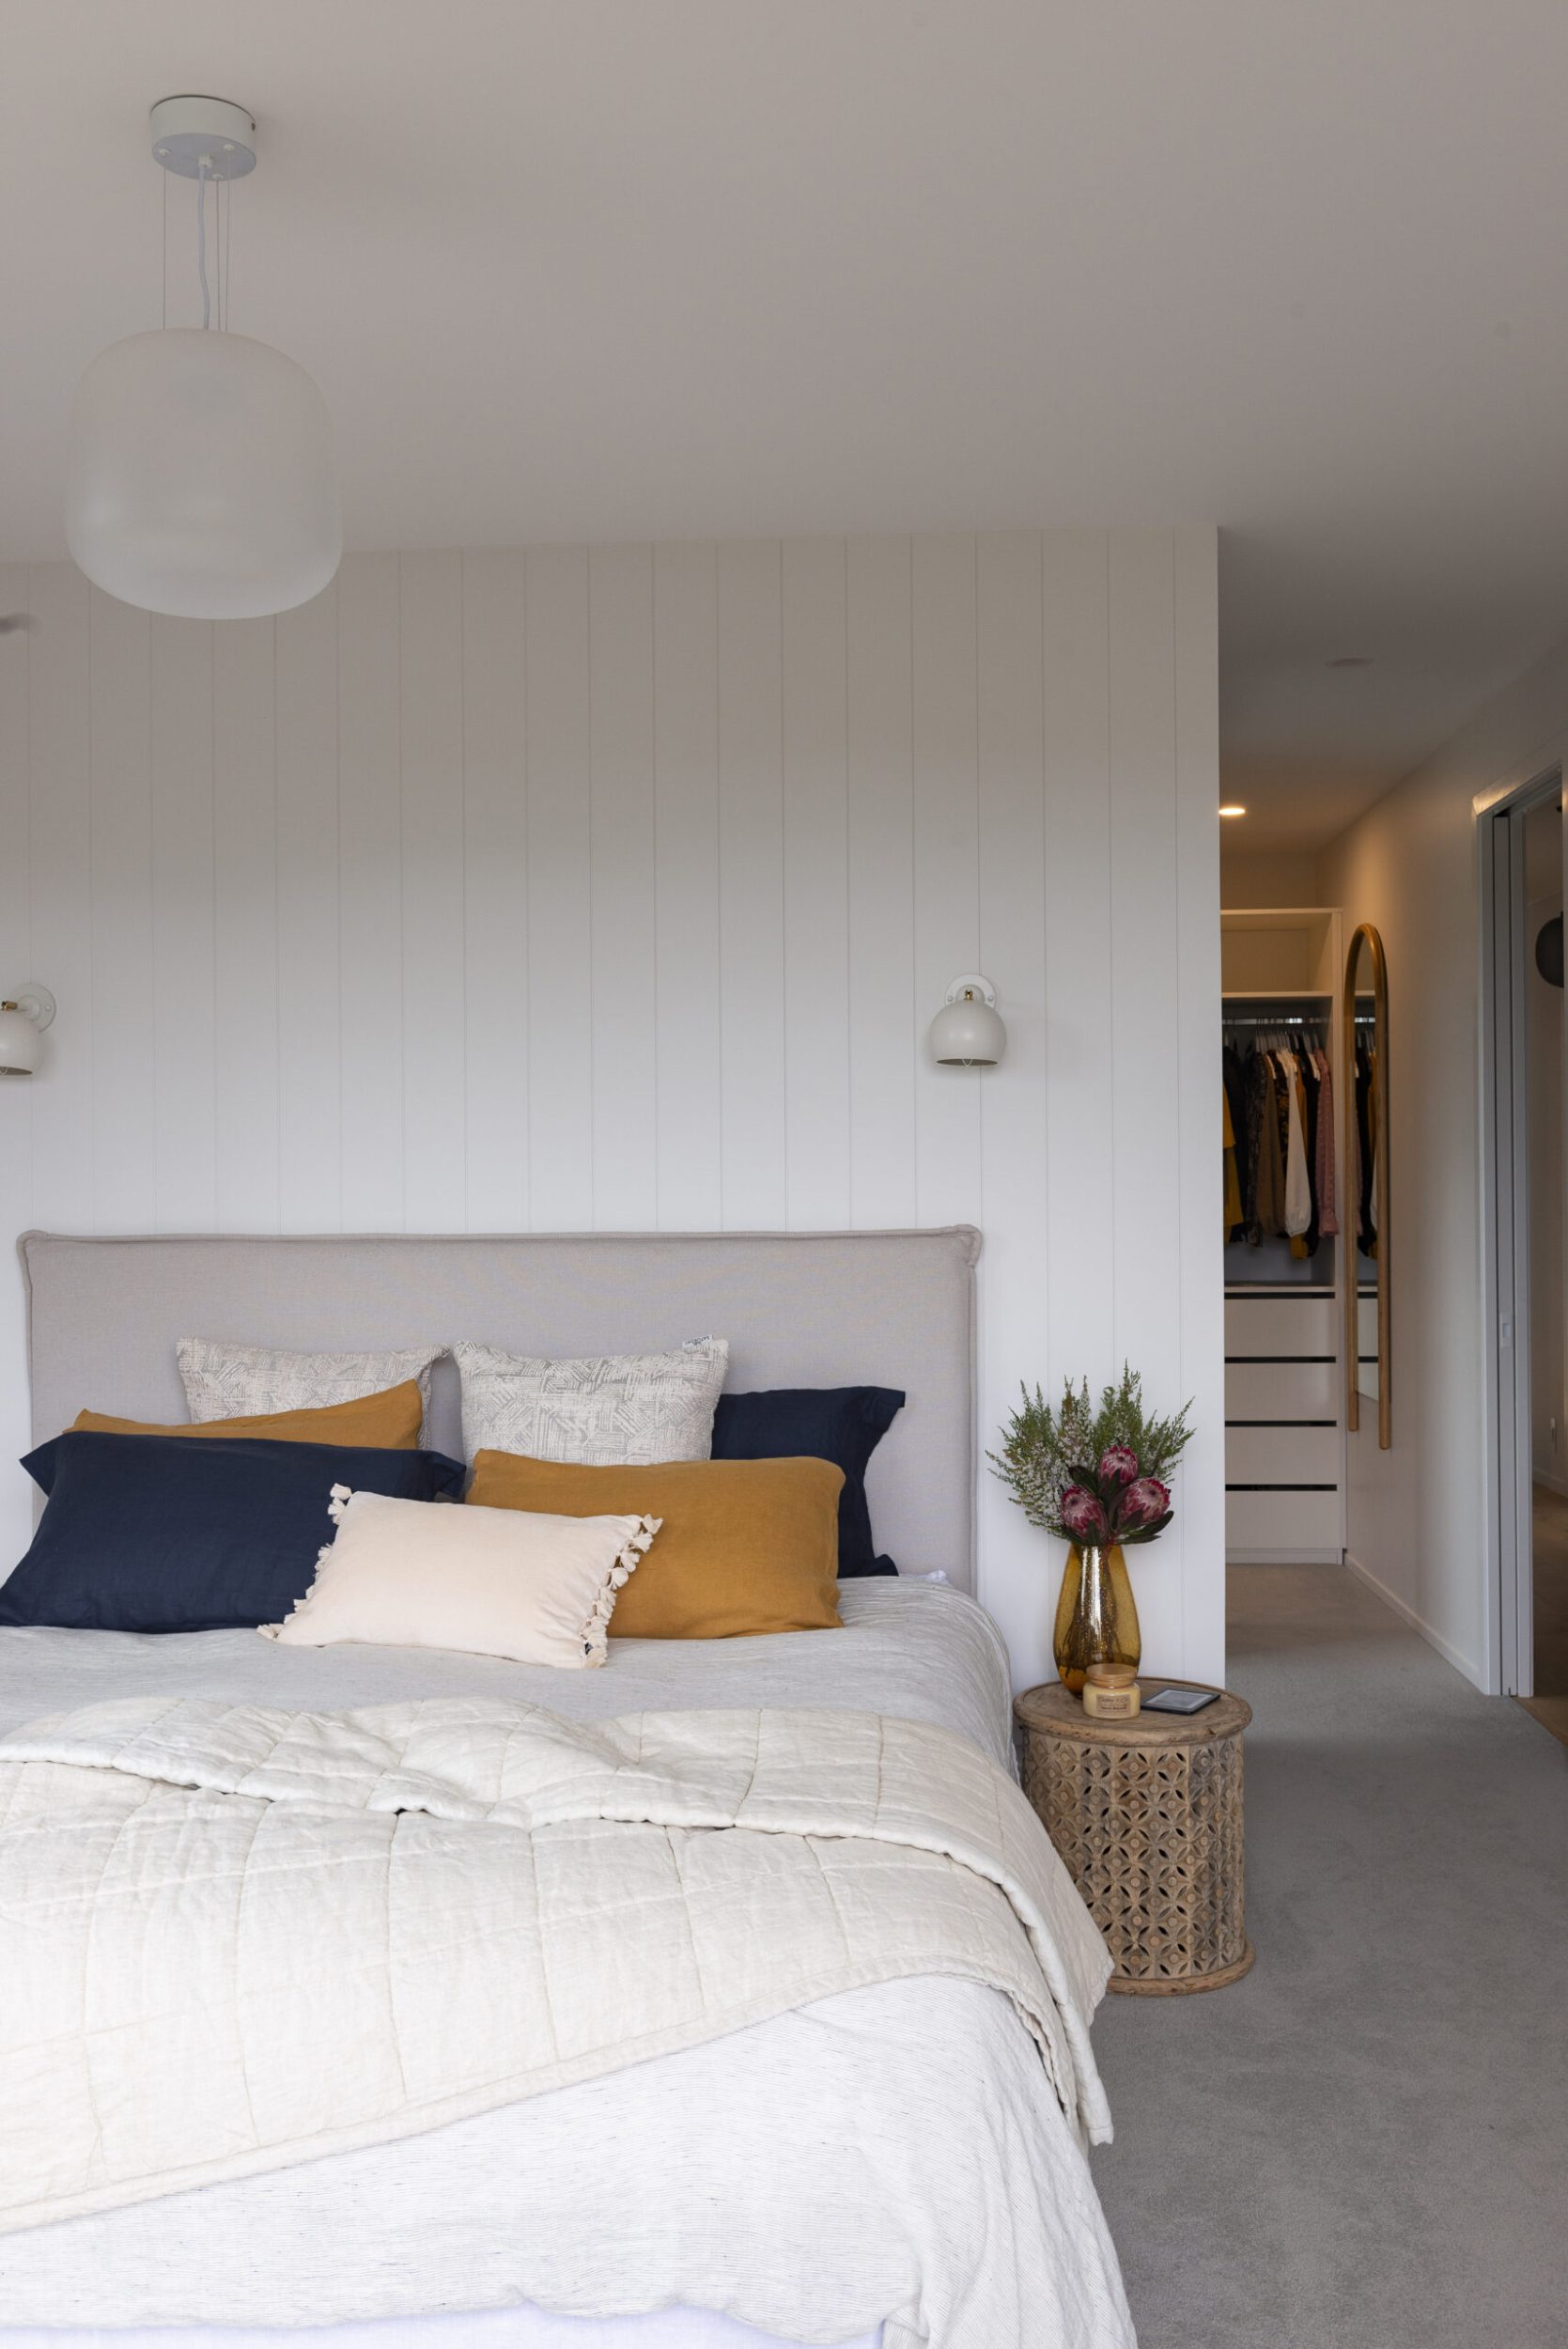 Bedroom with grey carpet, white wall panels, a bed with white bedsheets and colourful accent pillows